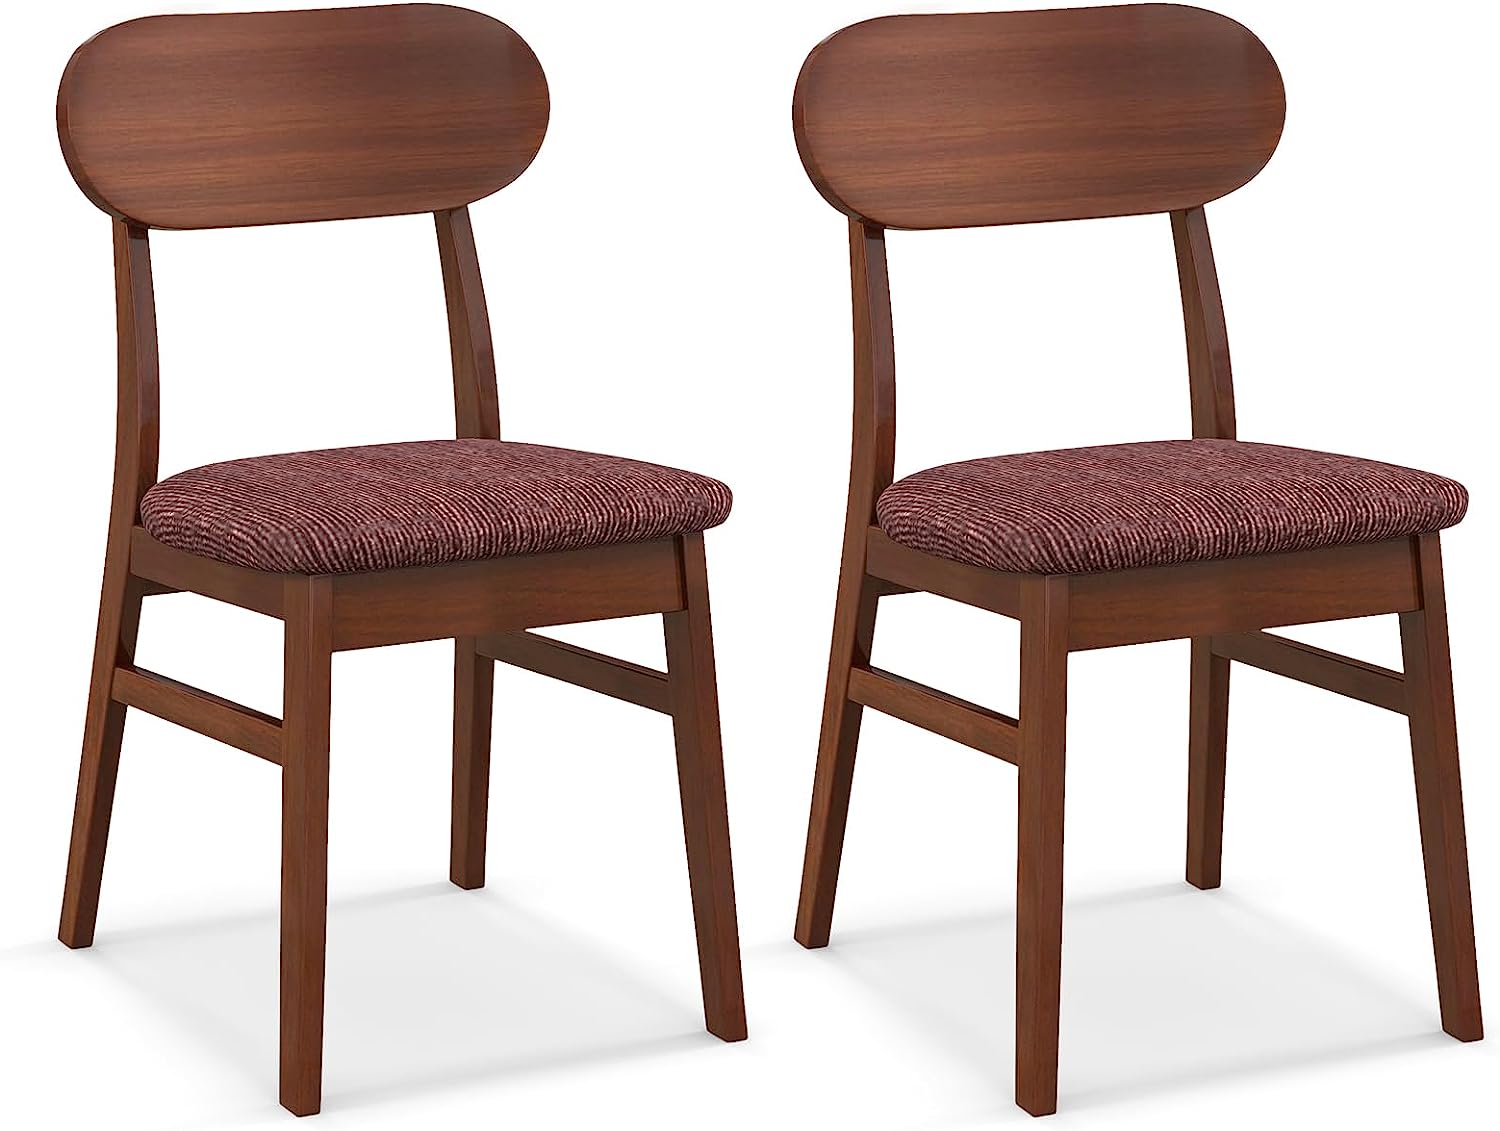 Giantex Wooden Dining Chairs Set of 2 or 4 Walnut, Farmhouse Kitchen Chairs with Padded Seat